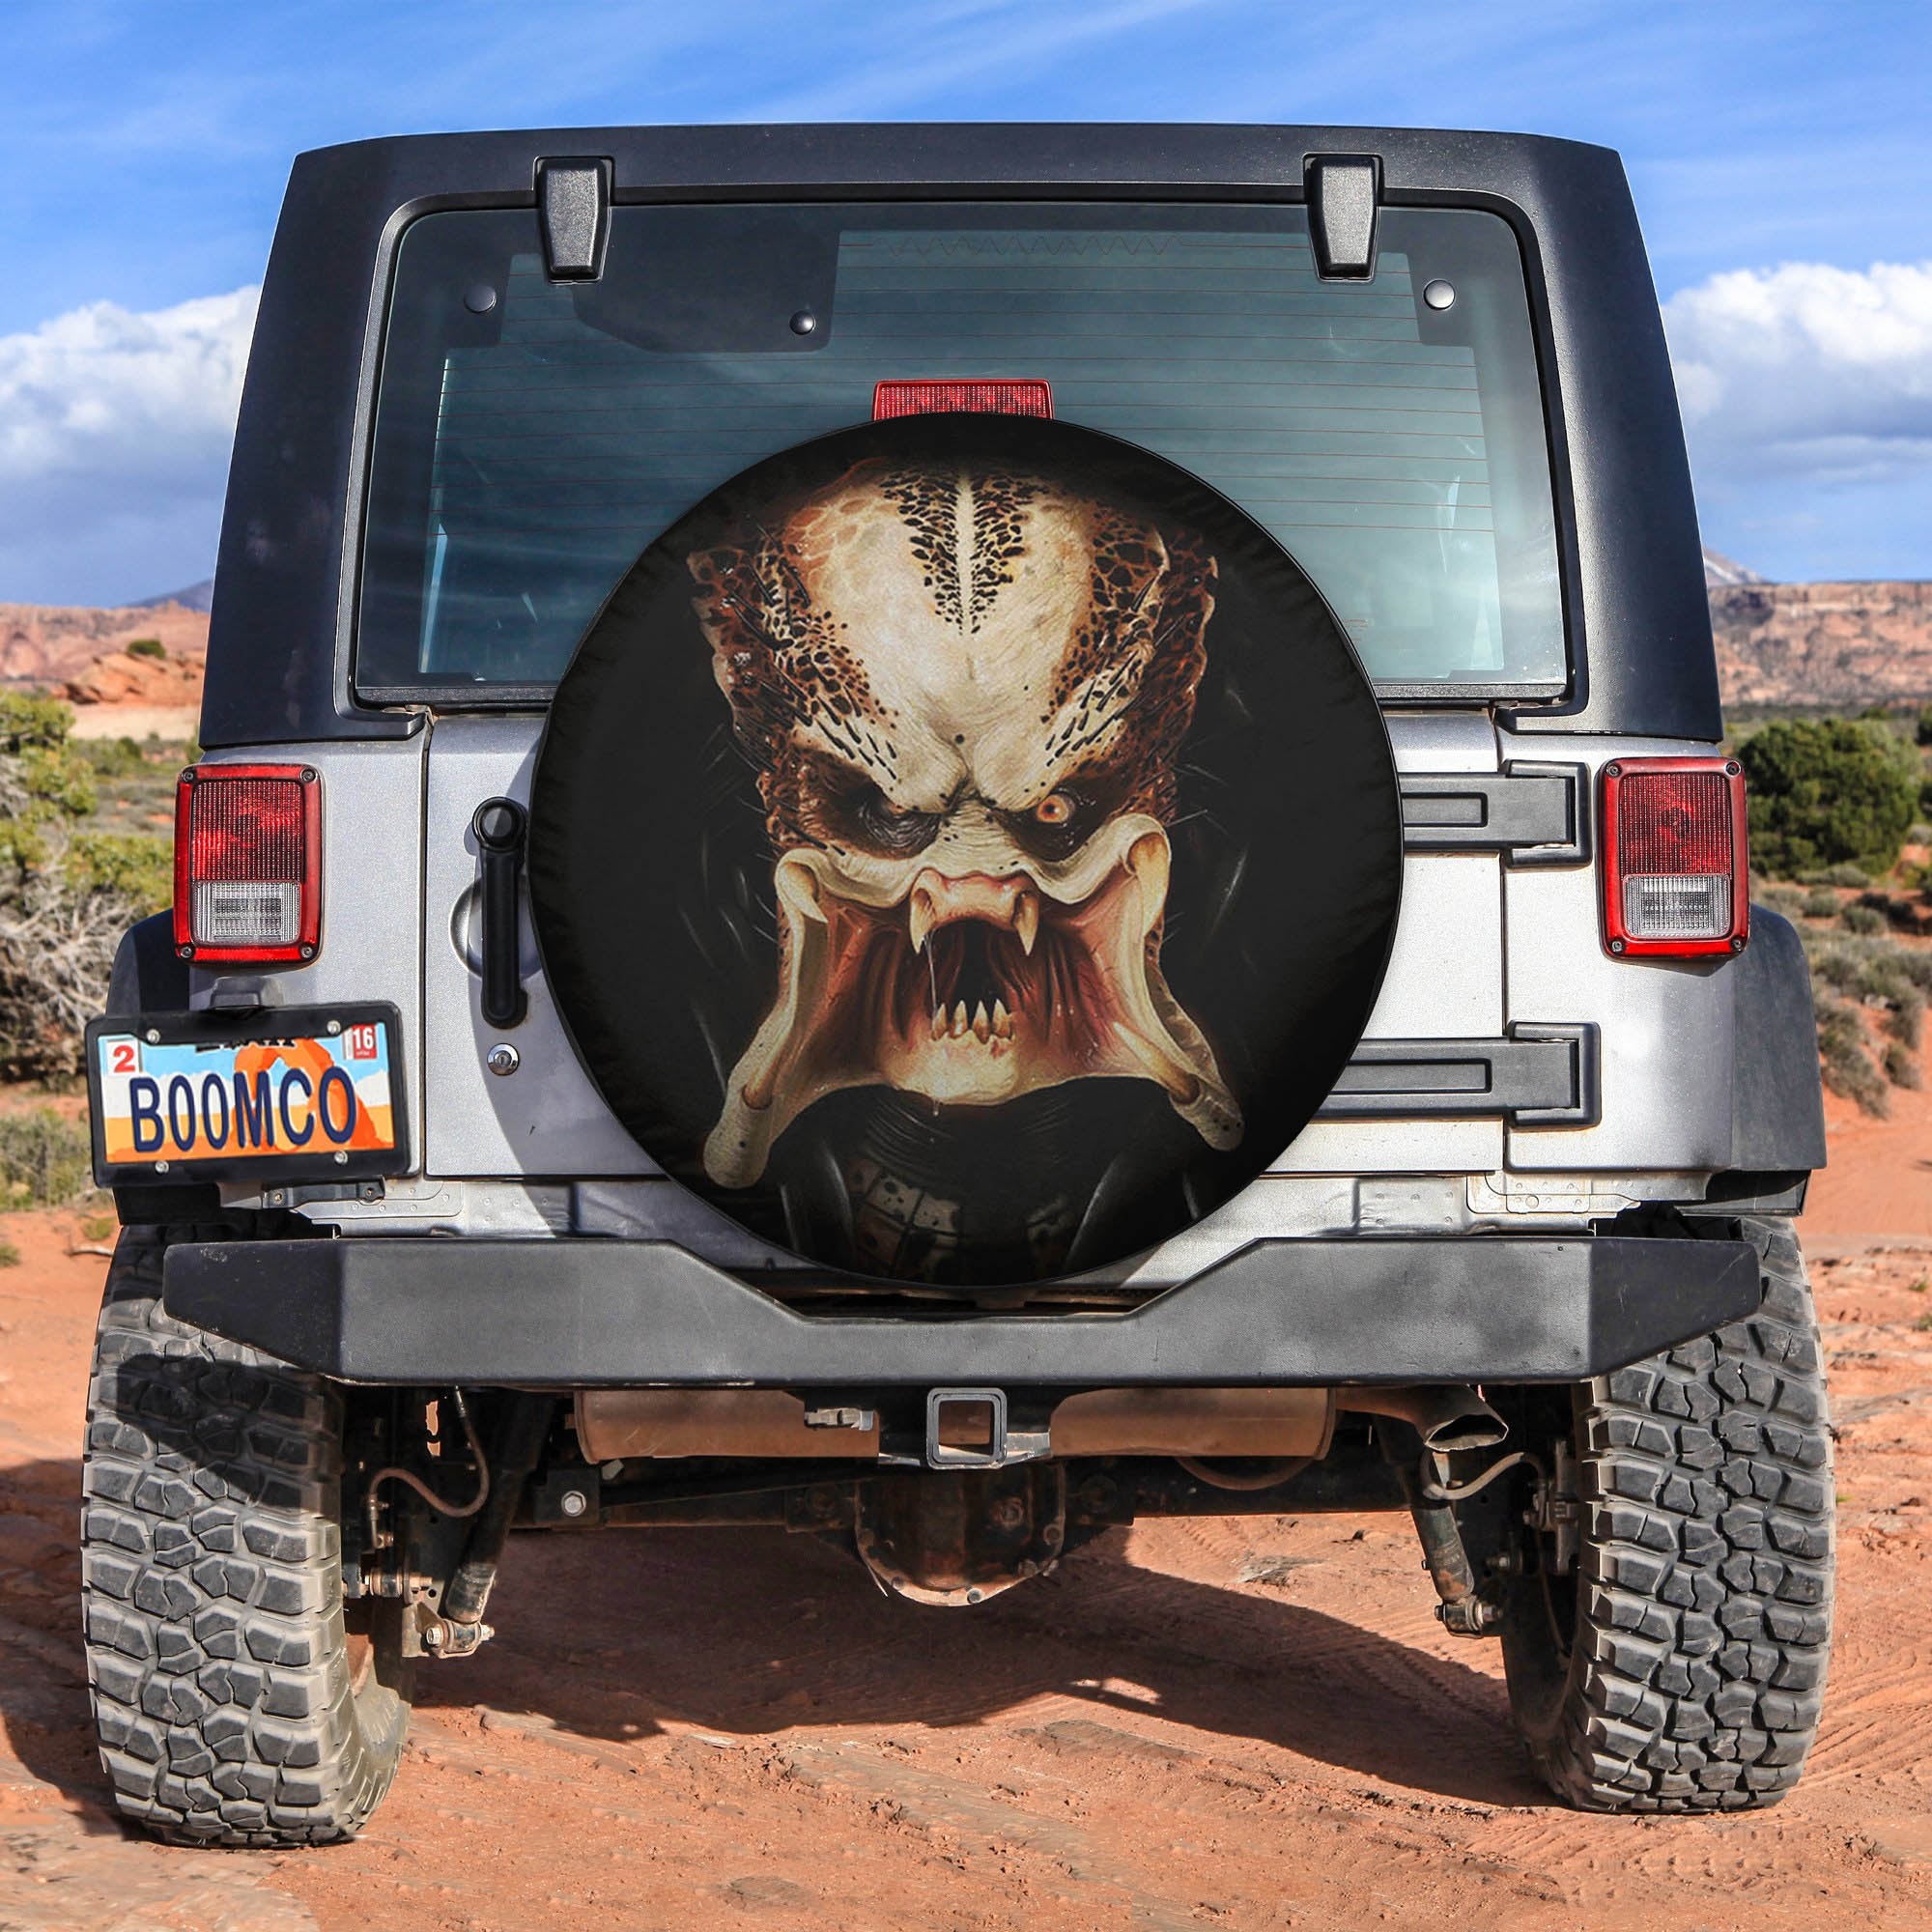 Predator Face Spare Tire Covers Gift For Campers